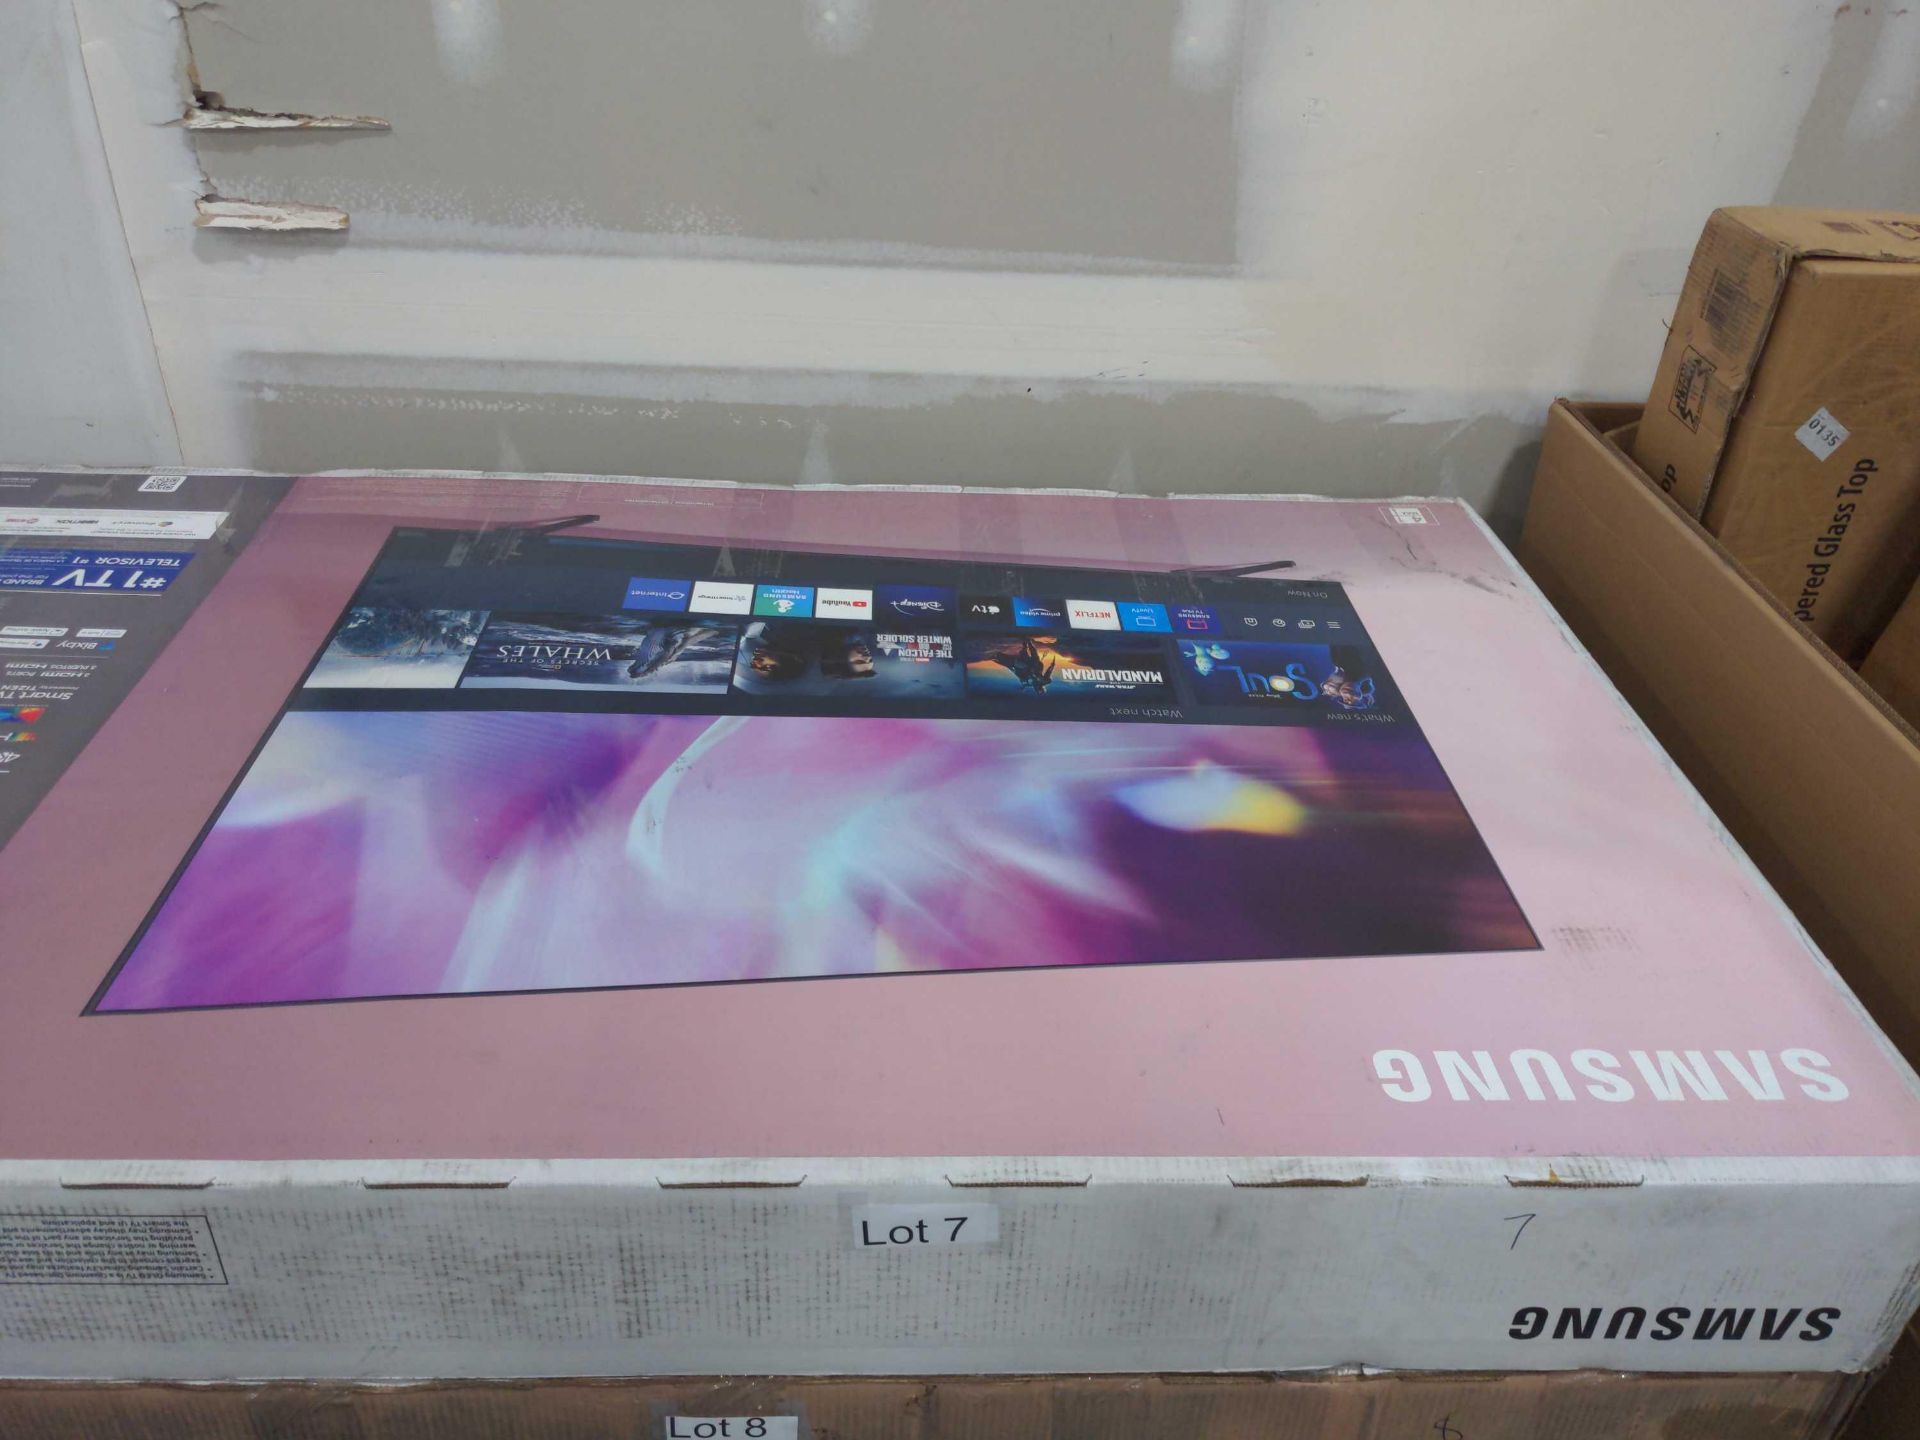 Samsung QLED 75" TV (grade a working & tested) Please ask for employee assistance to help with the T